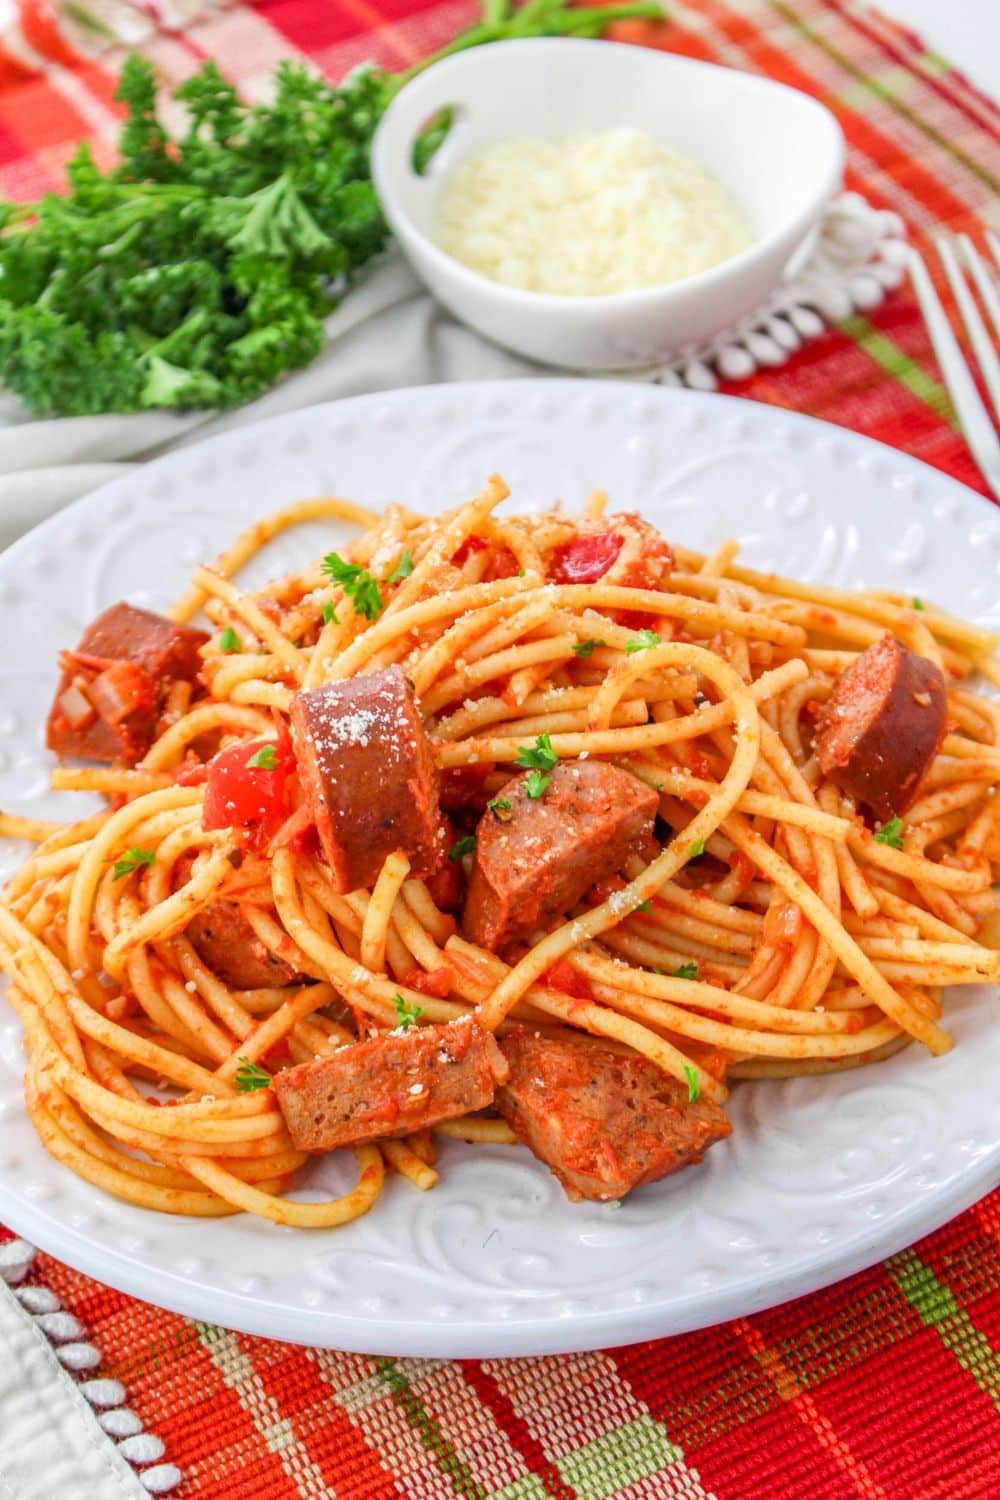 sausage spaghetti piled on plate with parsley and a bowl of parmesan sitting behind it on table